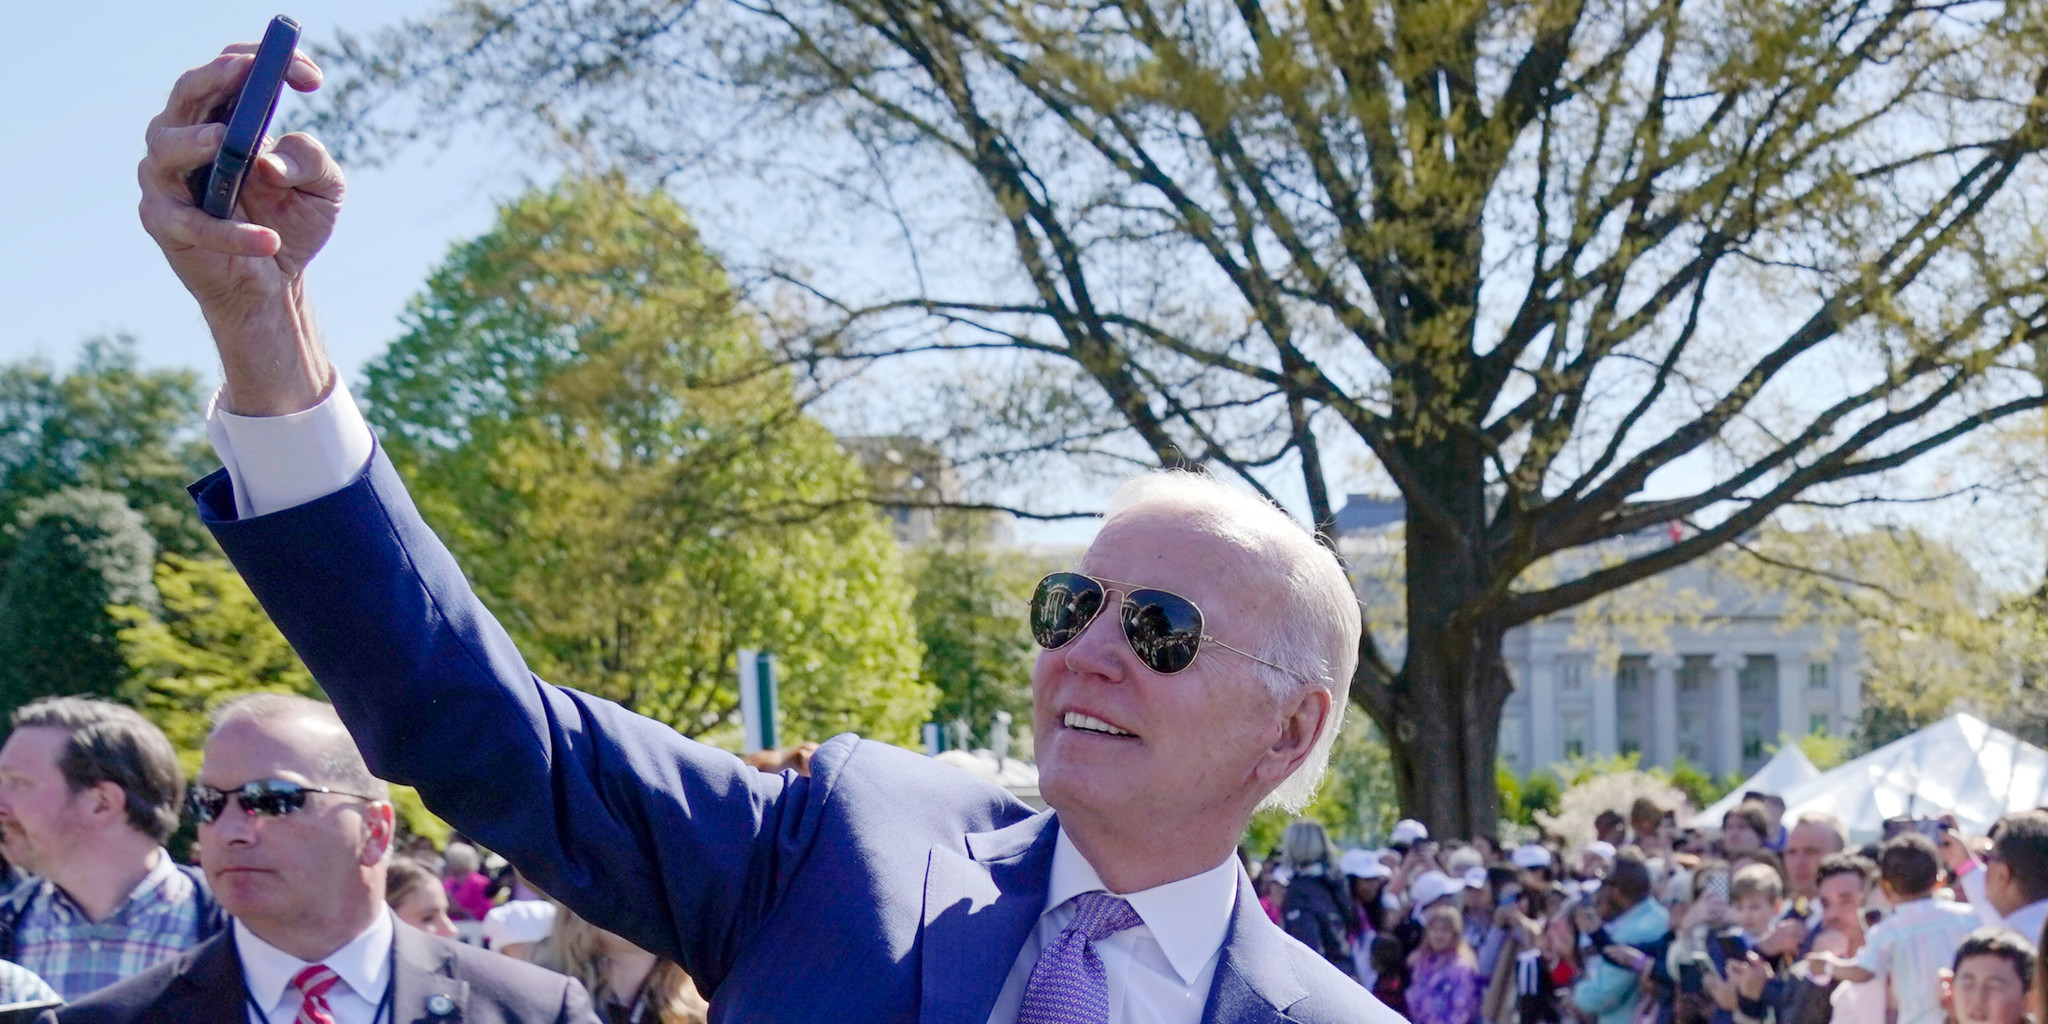 President Joe Biden takes a selfie with guests at the 2023 White House Easter Egg Roll, Monday, April 10, 2023, in Washington. (AP Photo/Evan Vucci)